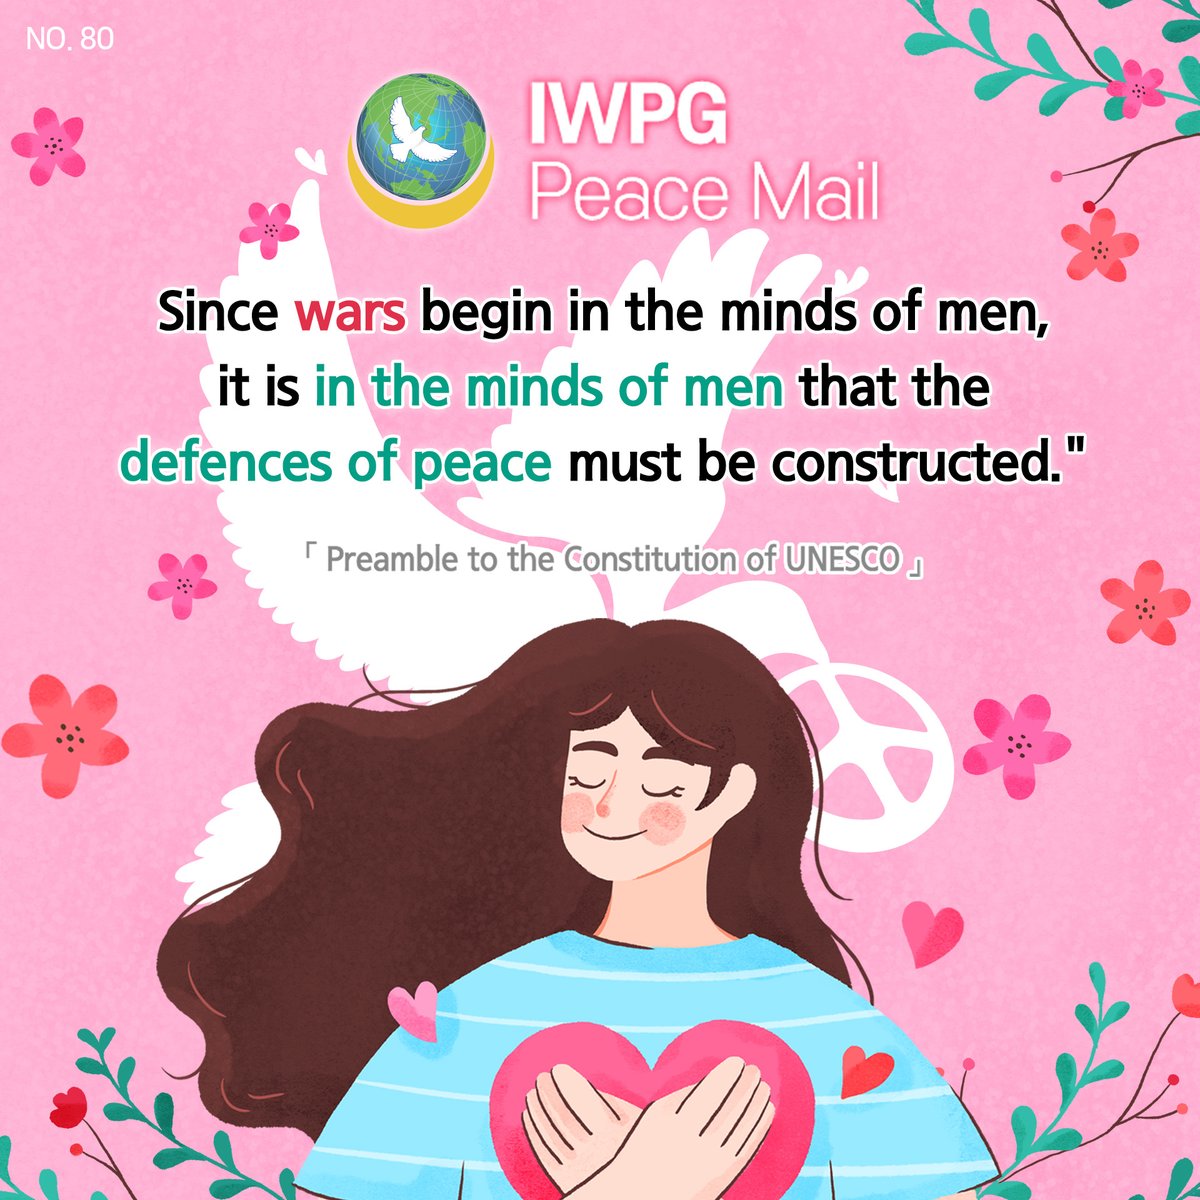 80th IWPG Peace Mail 
Since wars begin in the minds of men, it is in the minds of men that the defences of peace must be constructed.
-Preamble to the Constitution of UNESCO-

#PeaceMail #Peace_Message #IWPG_Peace_Mail #IWPG #International_Womens_Peace_Group #HWPL #IPYG #UNESCO